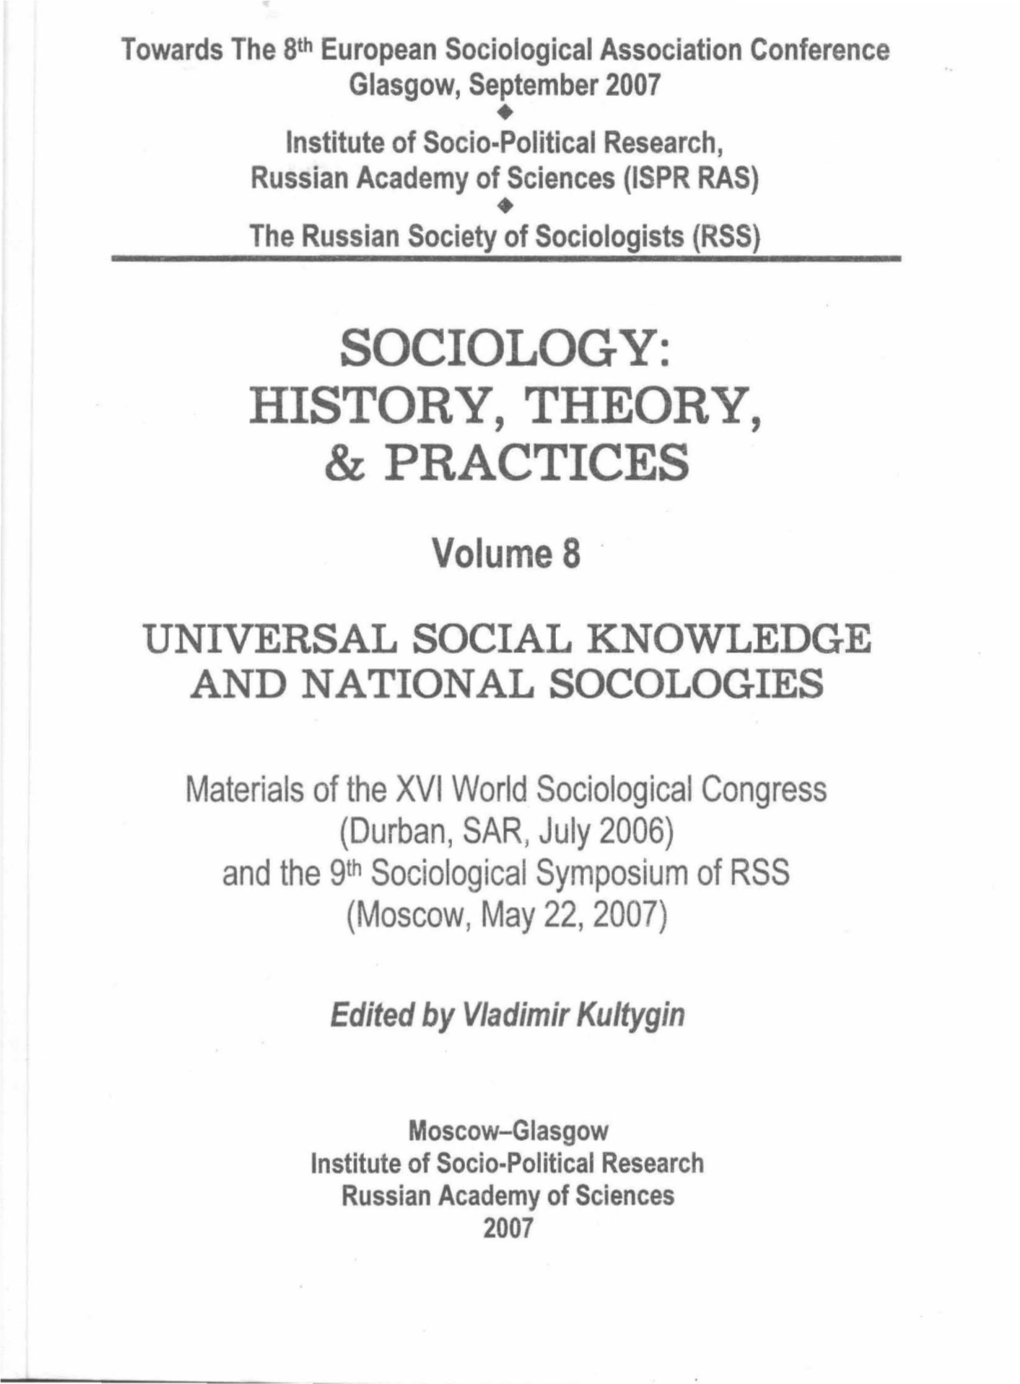 Sociology: History, Theory, & Practices